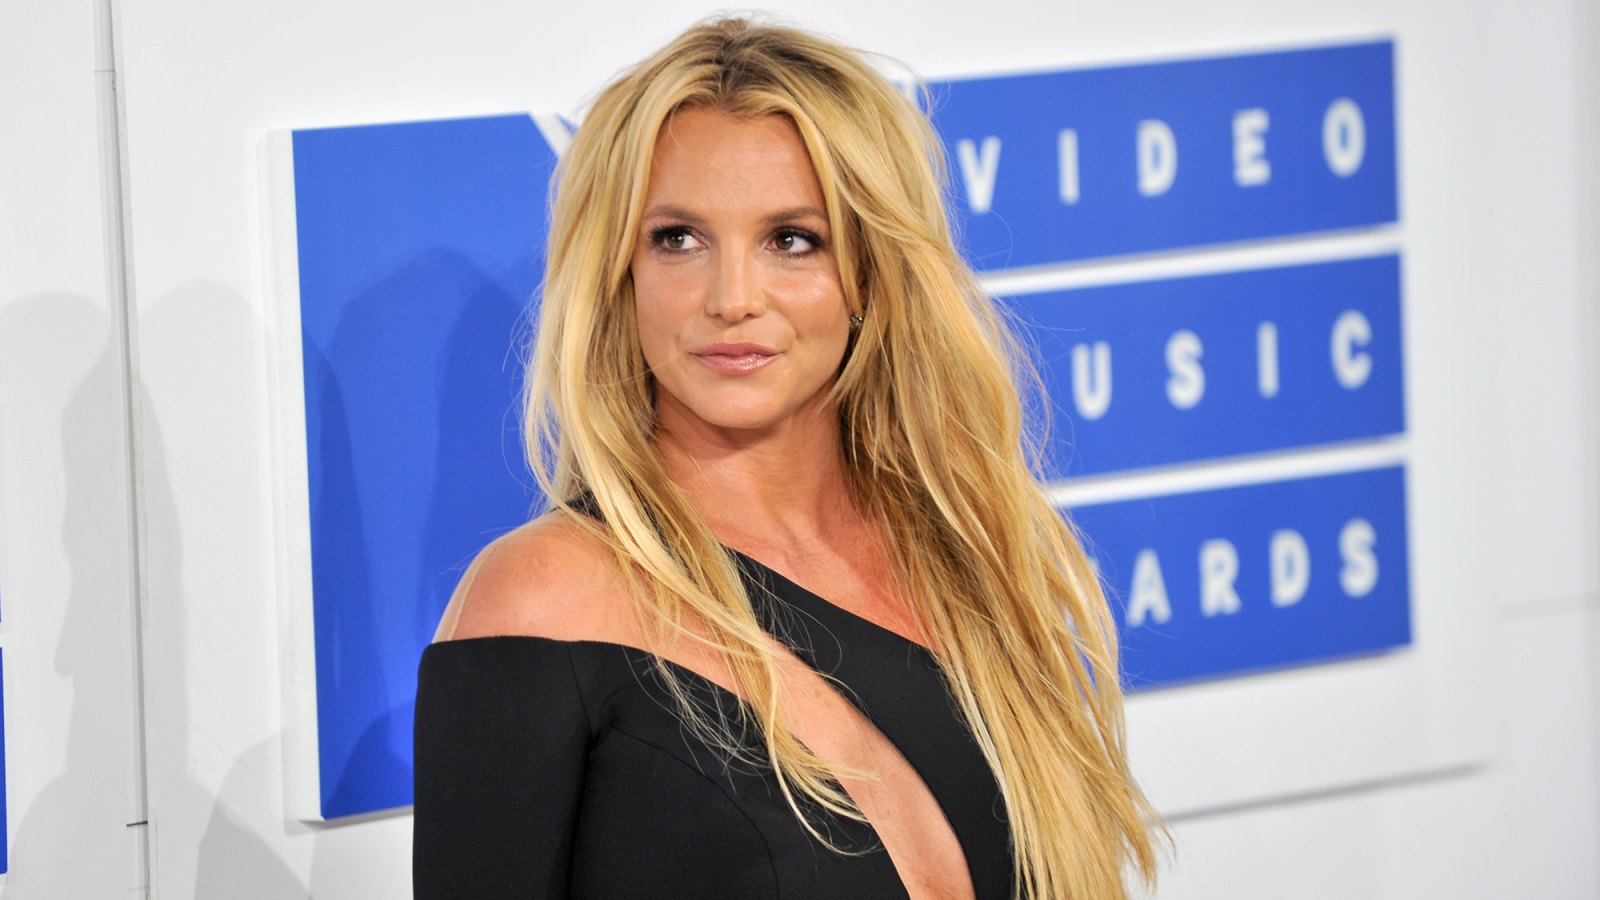 Britney Spears Reunites With Sons After Mental Health Treatment